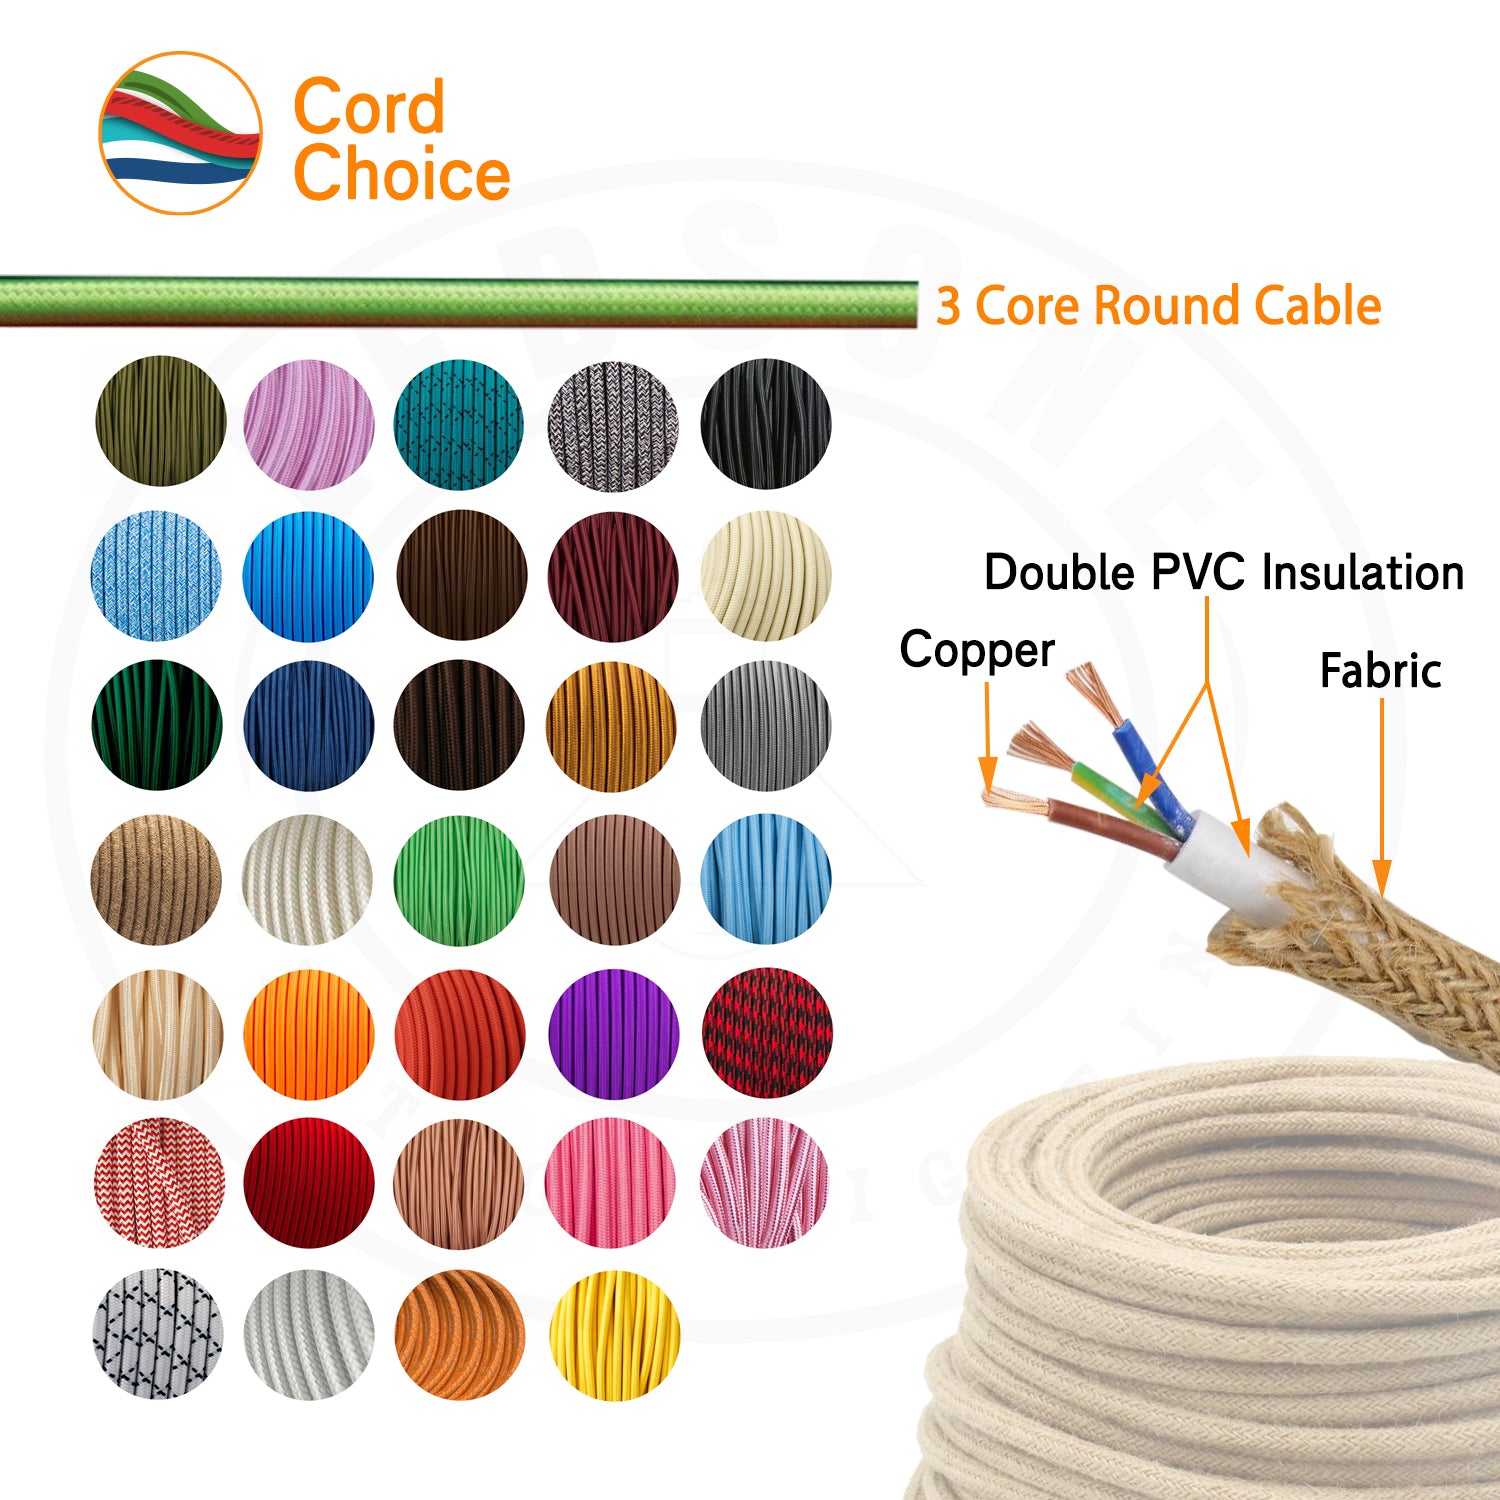 3-Core Round Cable .JPG